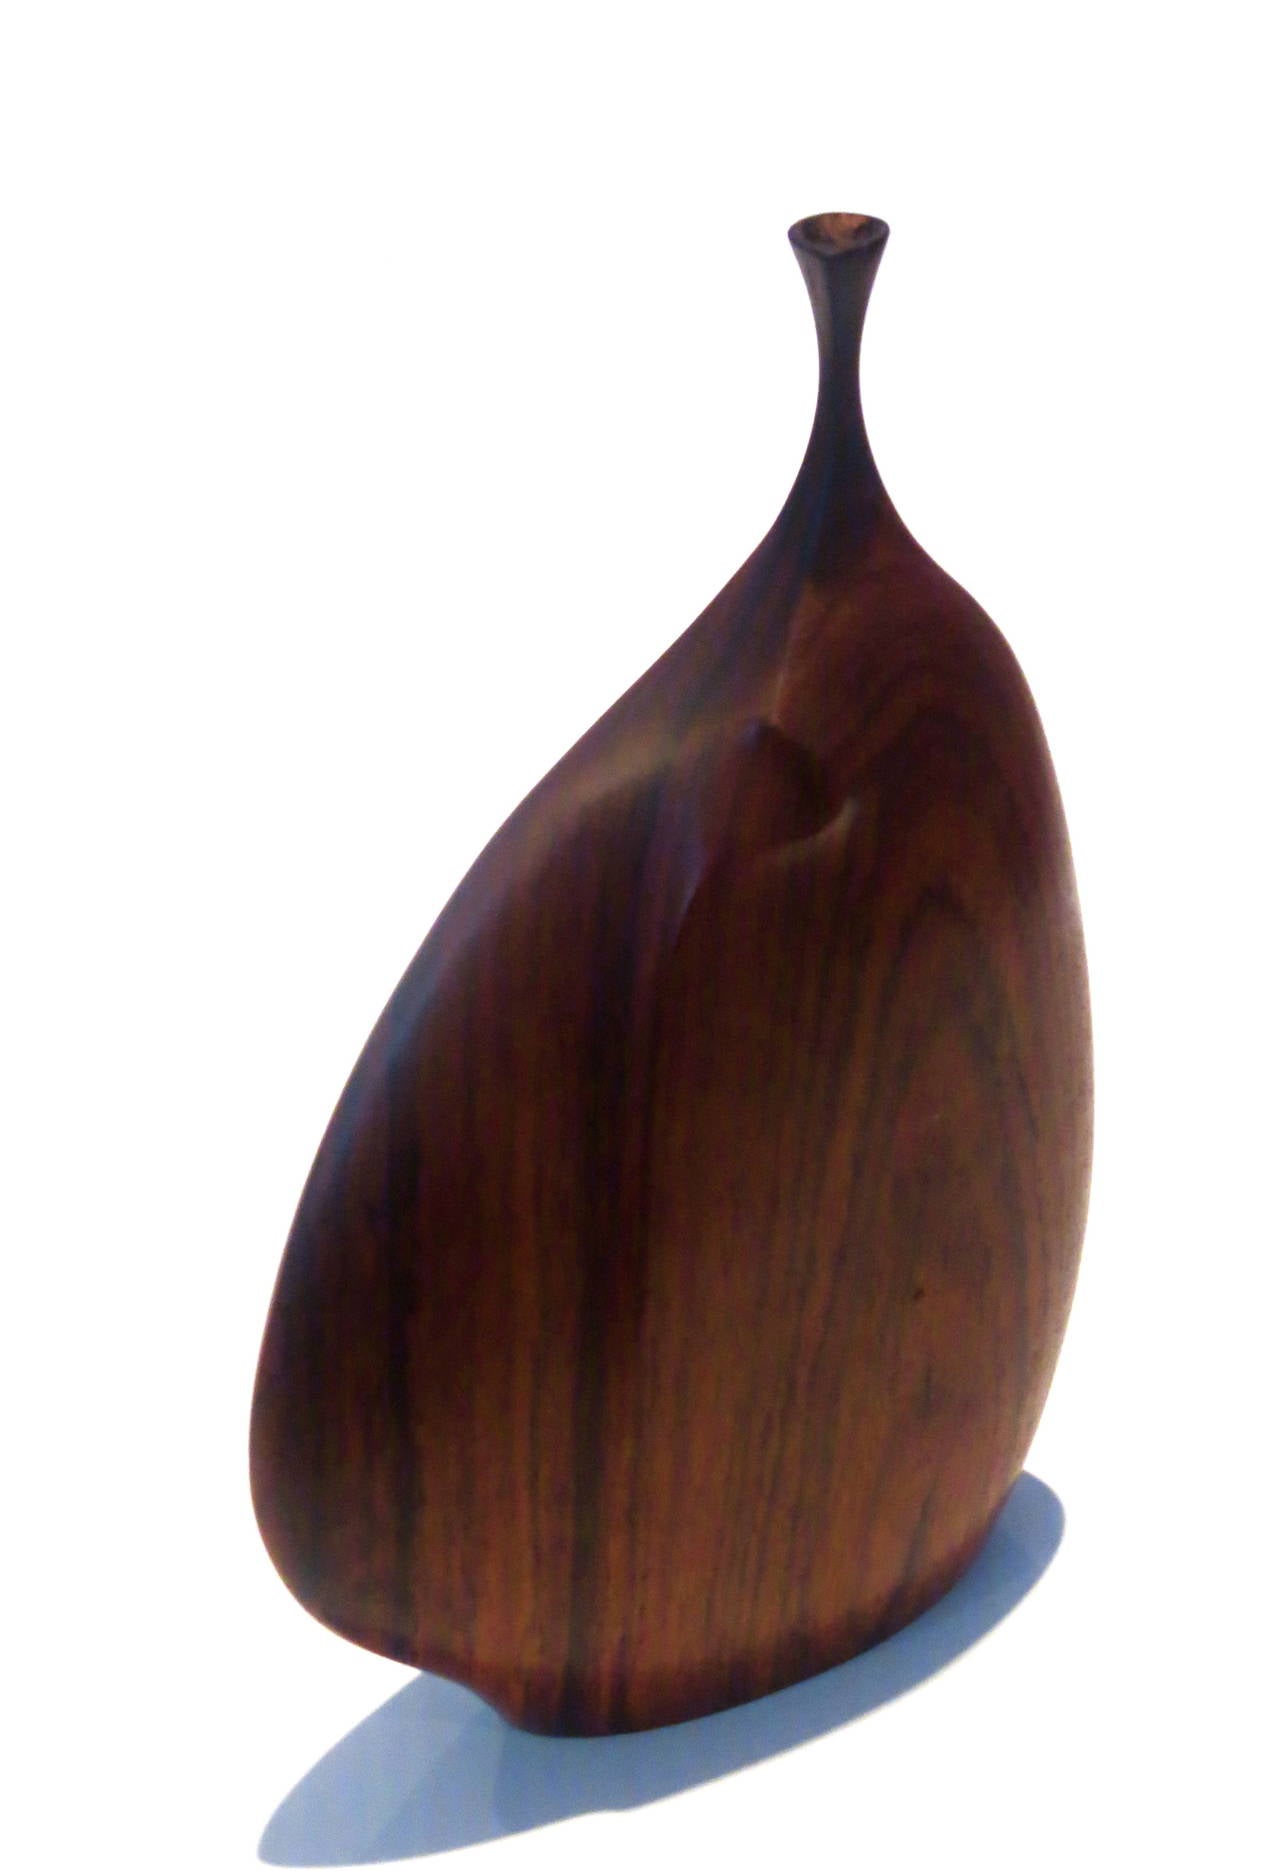 A beautiful wood vase done by well-known artist Doug Ayers, circa 1960s signed at the bottom, I believe its rosewood, the condition its great except there was a professional repair on the neck, invisible to the eye, but needs to be mentioned, simple